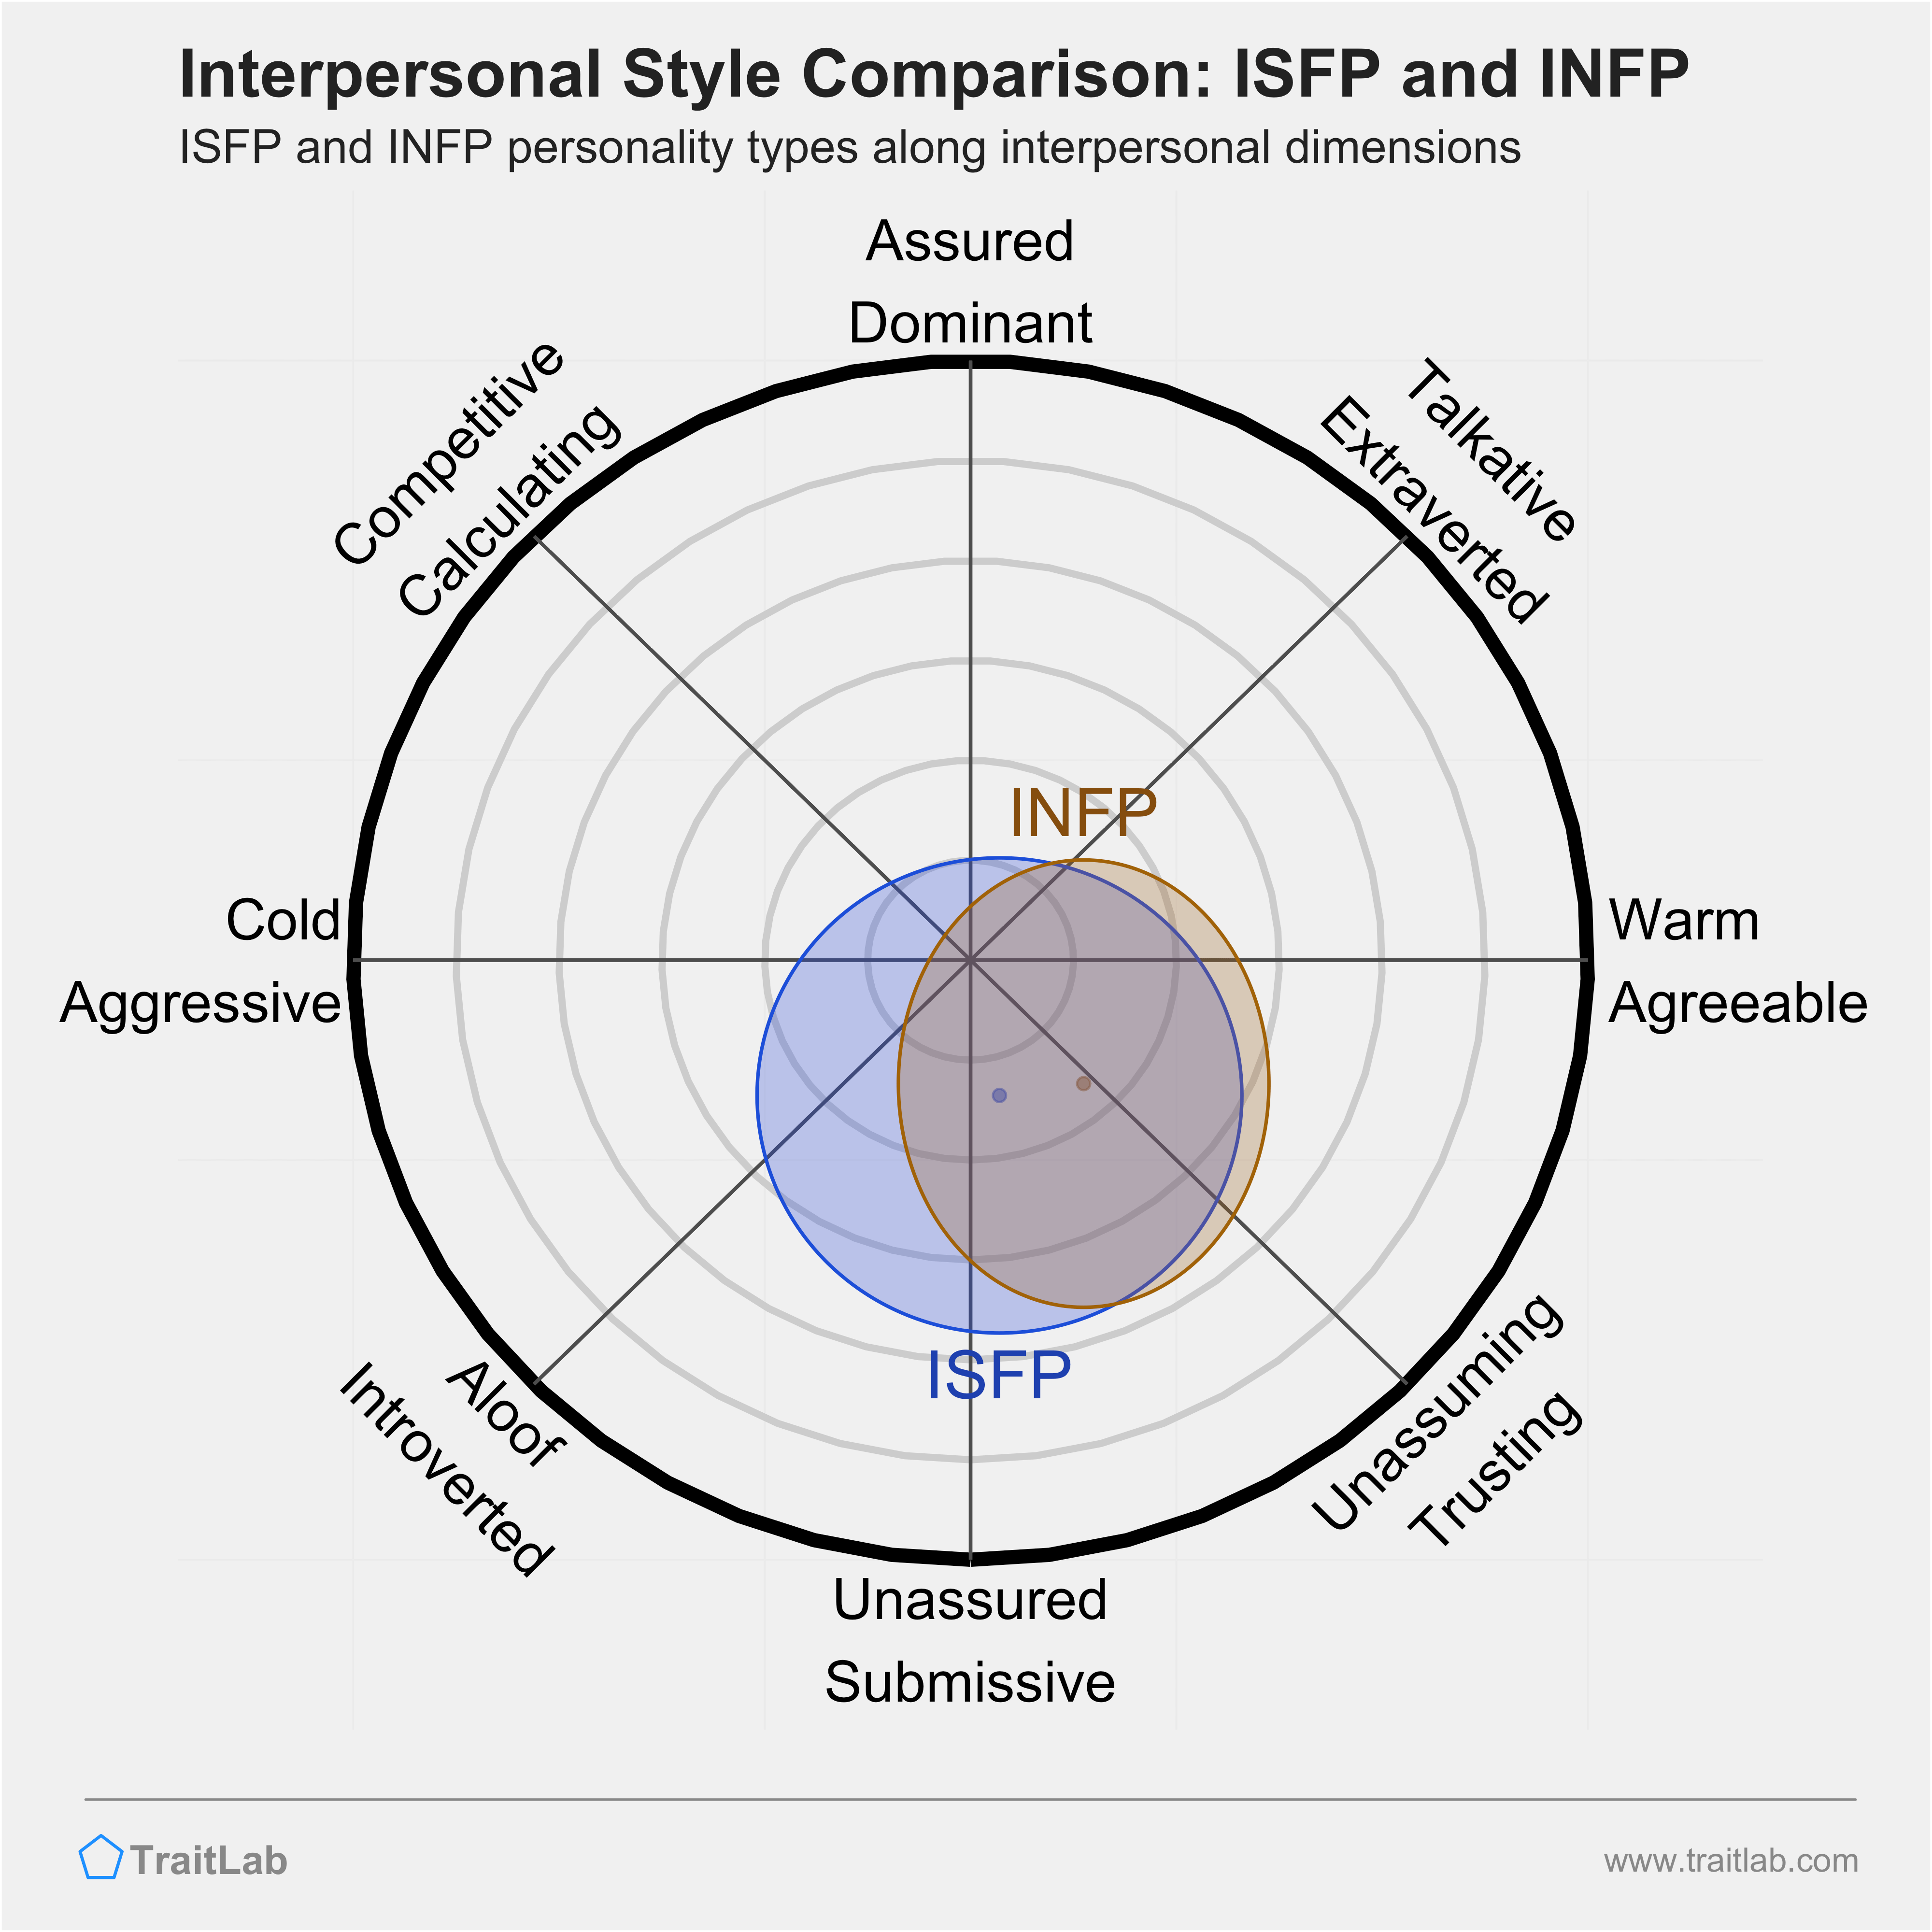 ISFP and INFP comparison across interpersonal dimensions